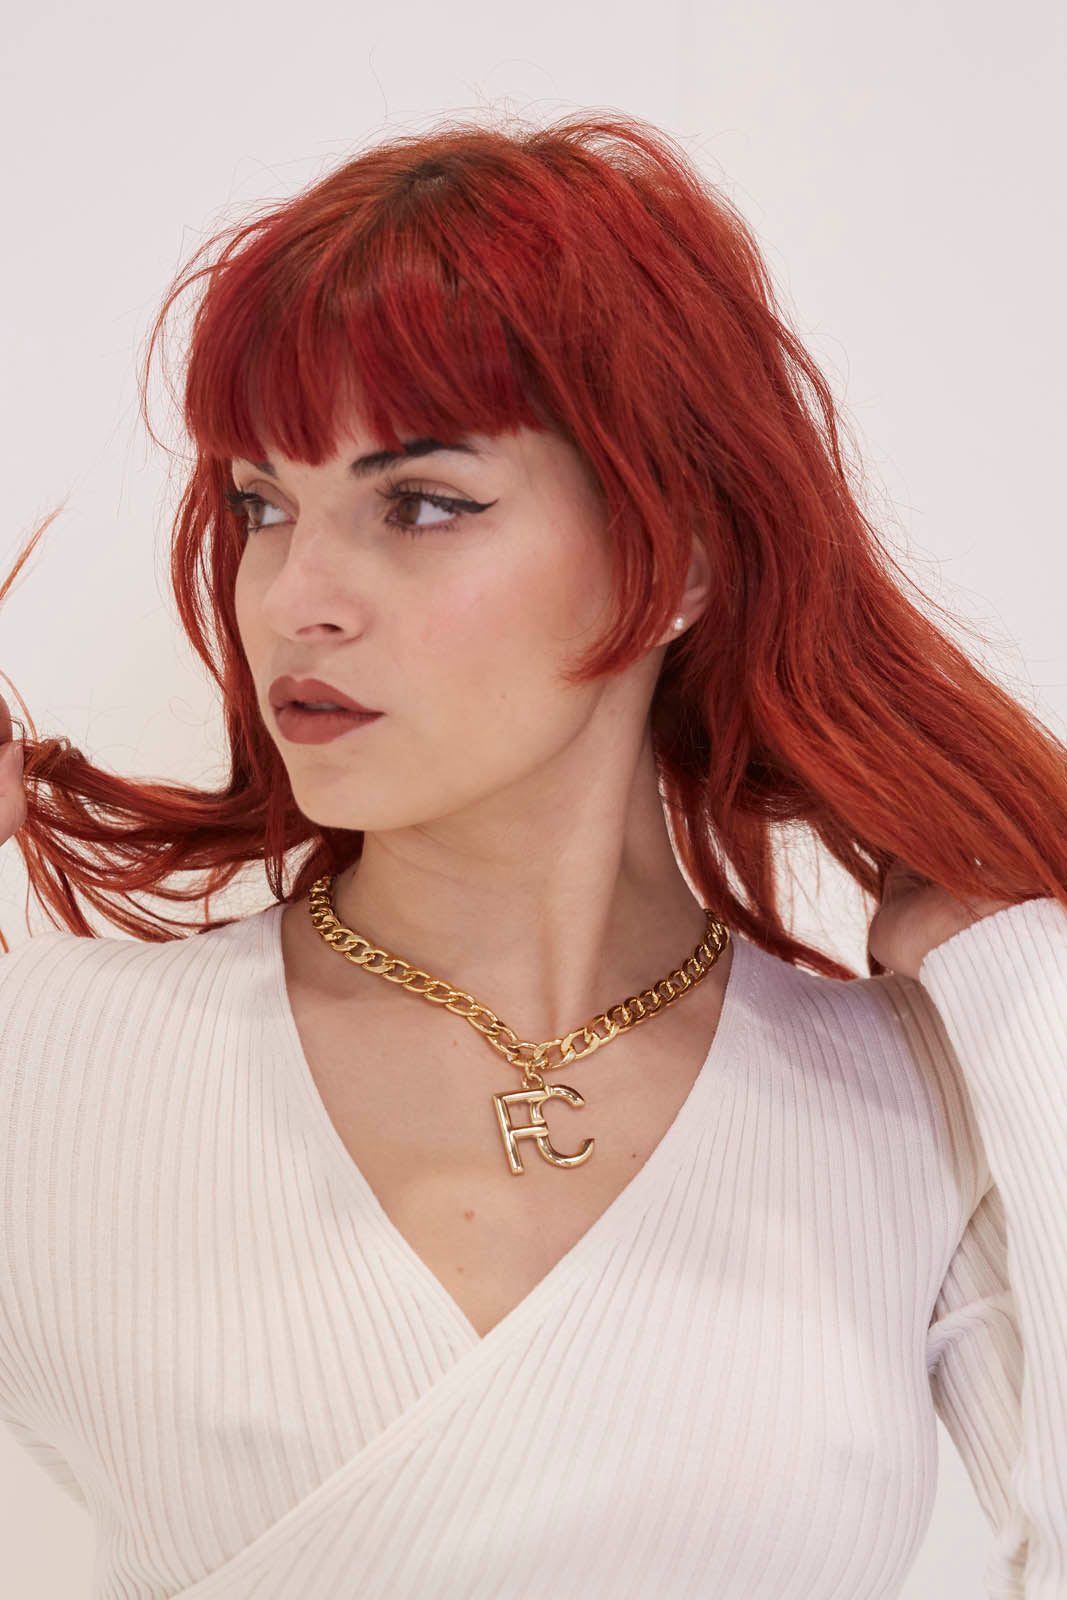 Sara in the gold chain FC necklace